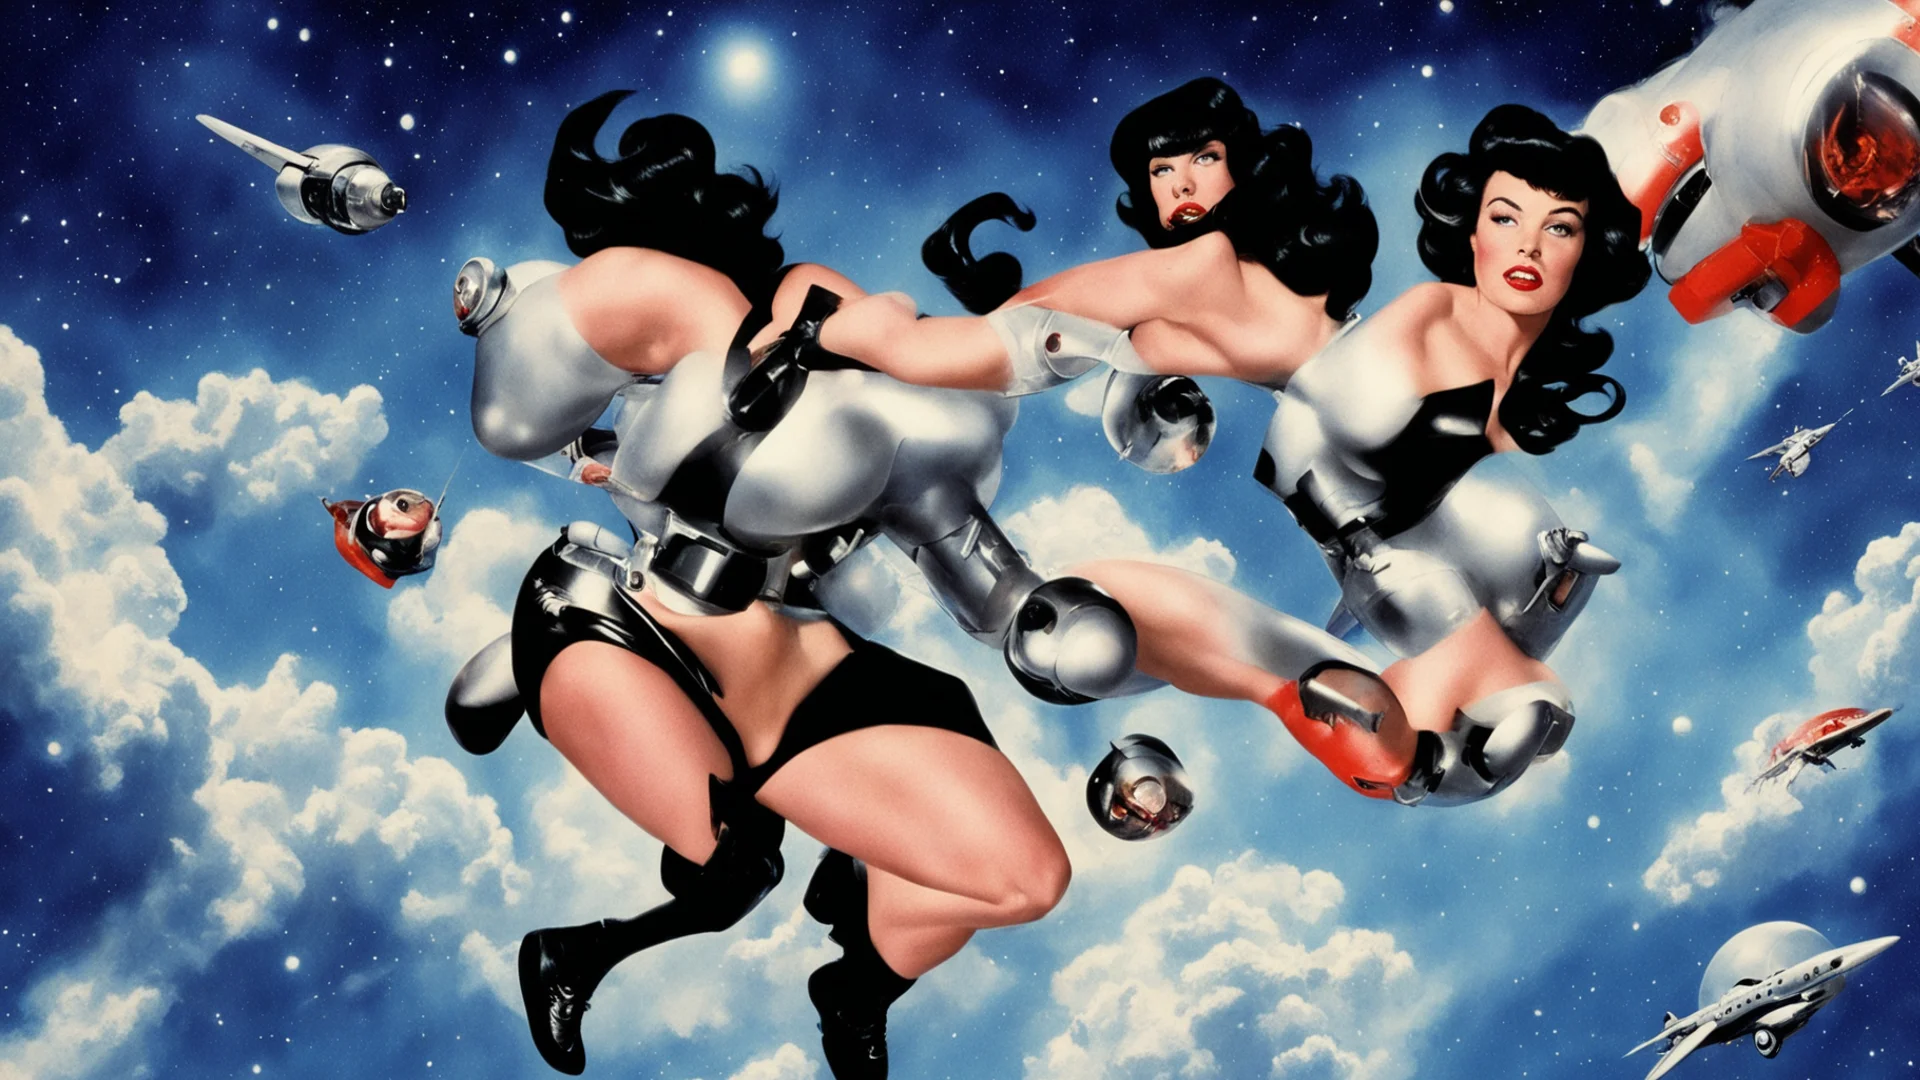 bettie page as a b movie space traveller flying through space with a jet pack wide